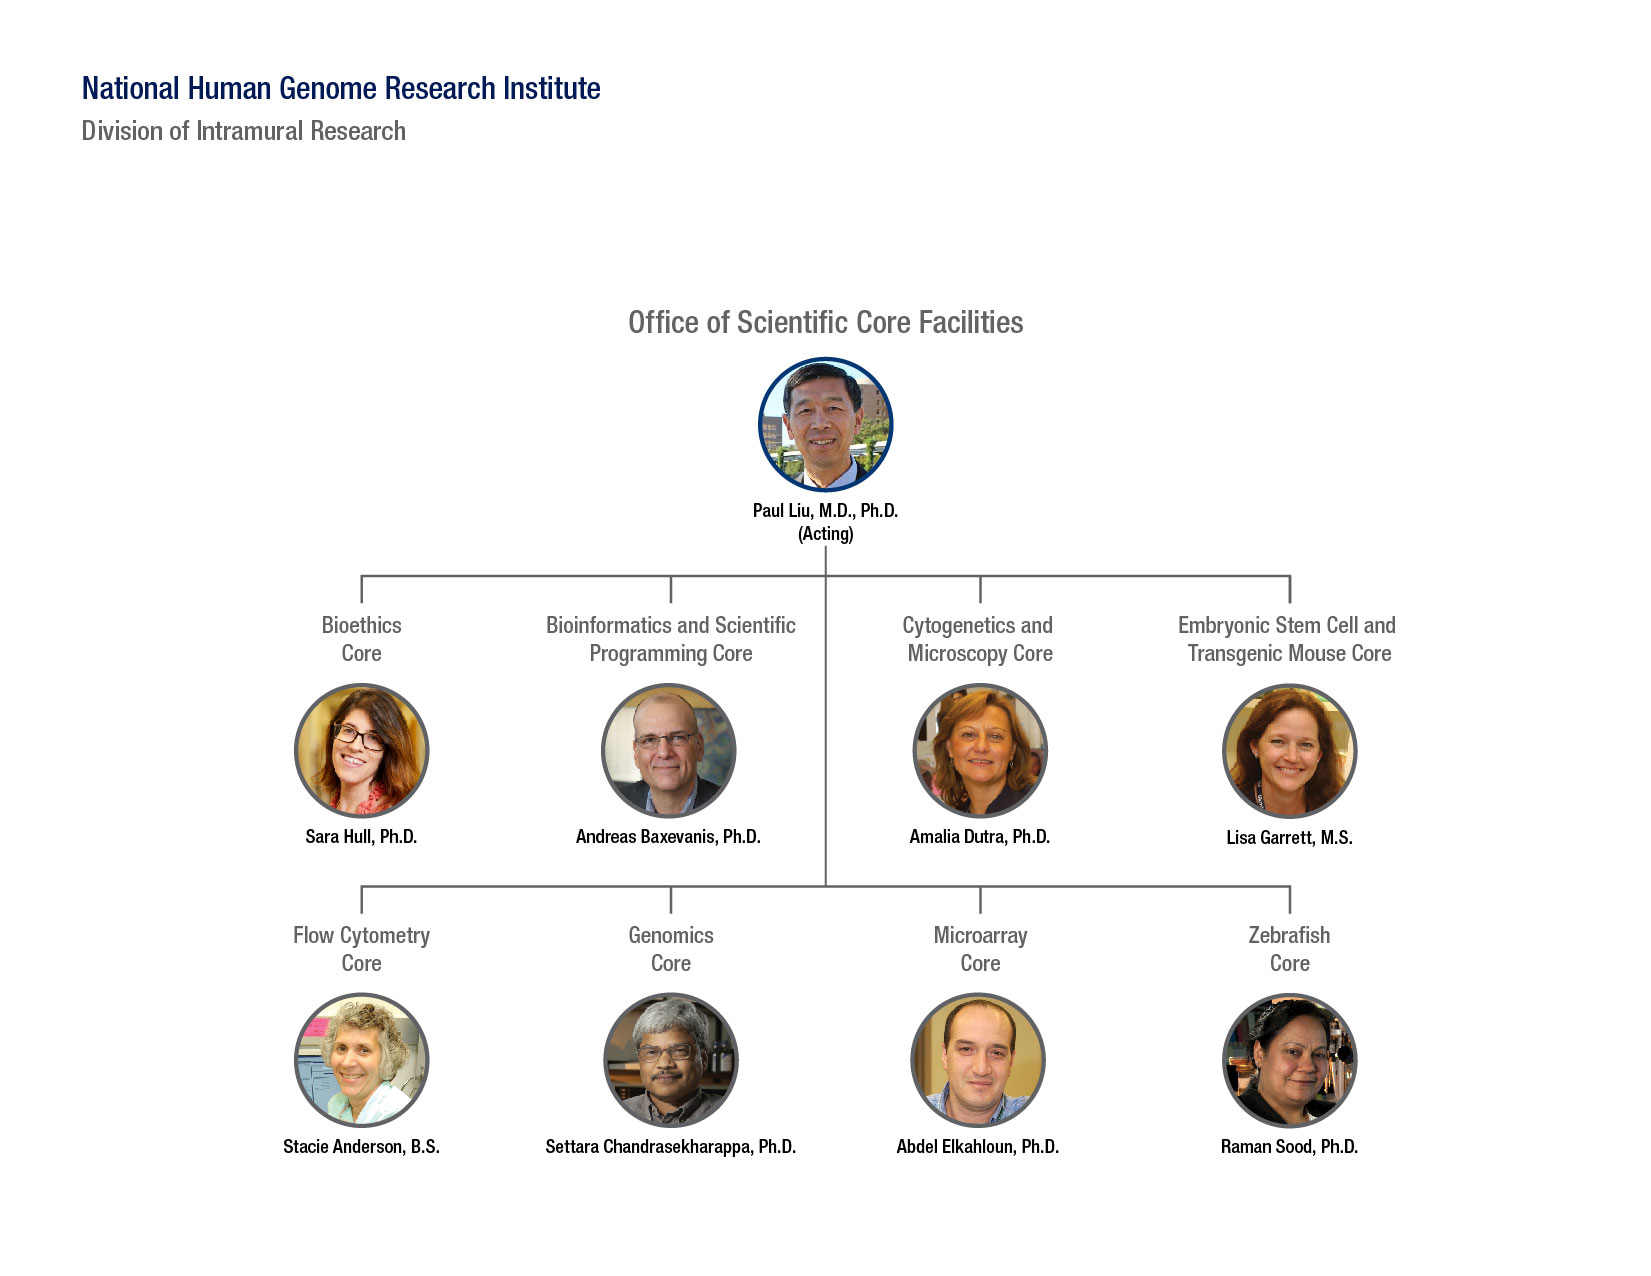 Office of Scientific Core Facilities Org Chart